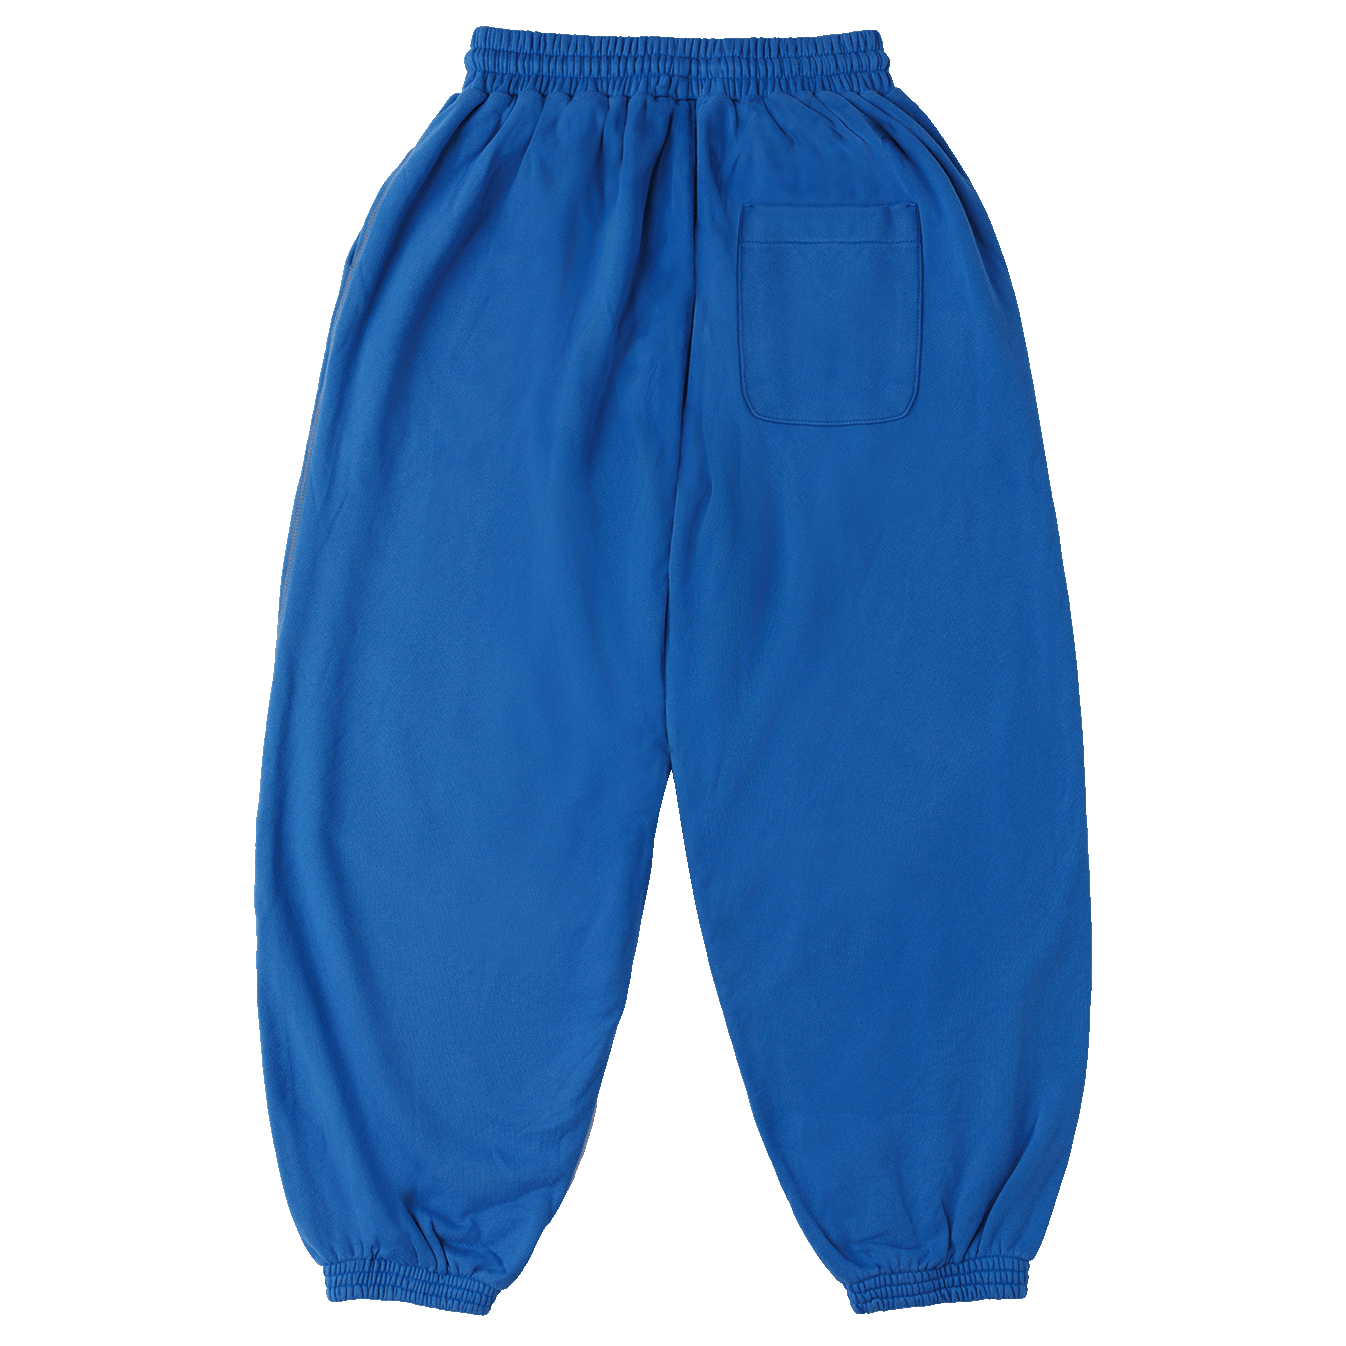 nook sweatpants in bright back